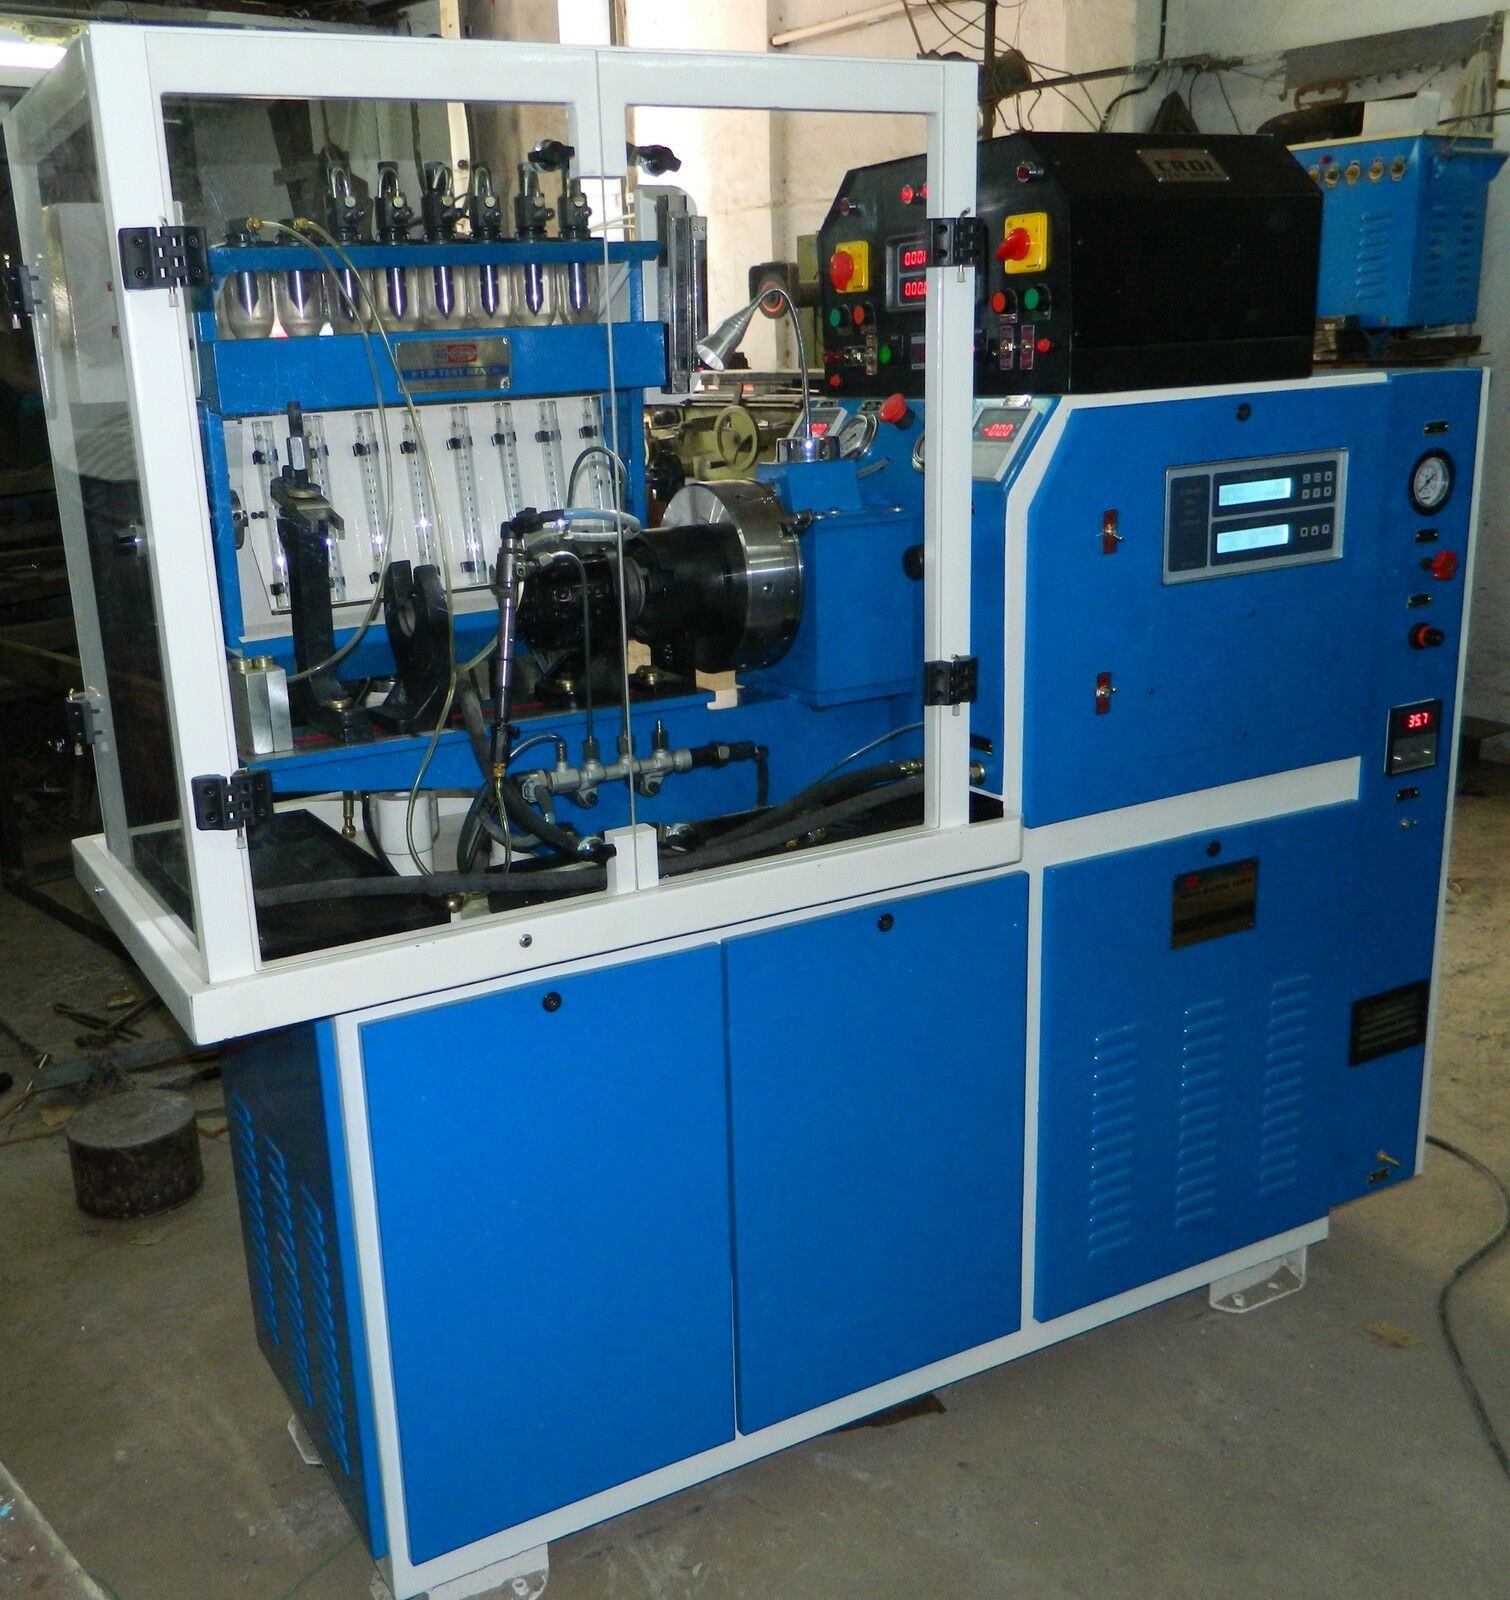 Multipurpose Diesel Injector Pump & Common Rail Test Bench CRDI 800 E / Stand, 8 Cylinder.